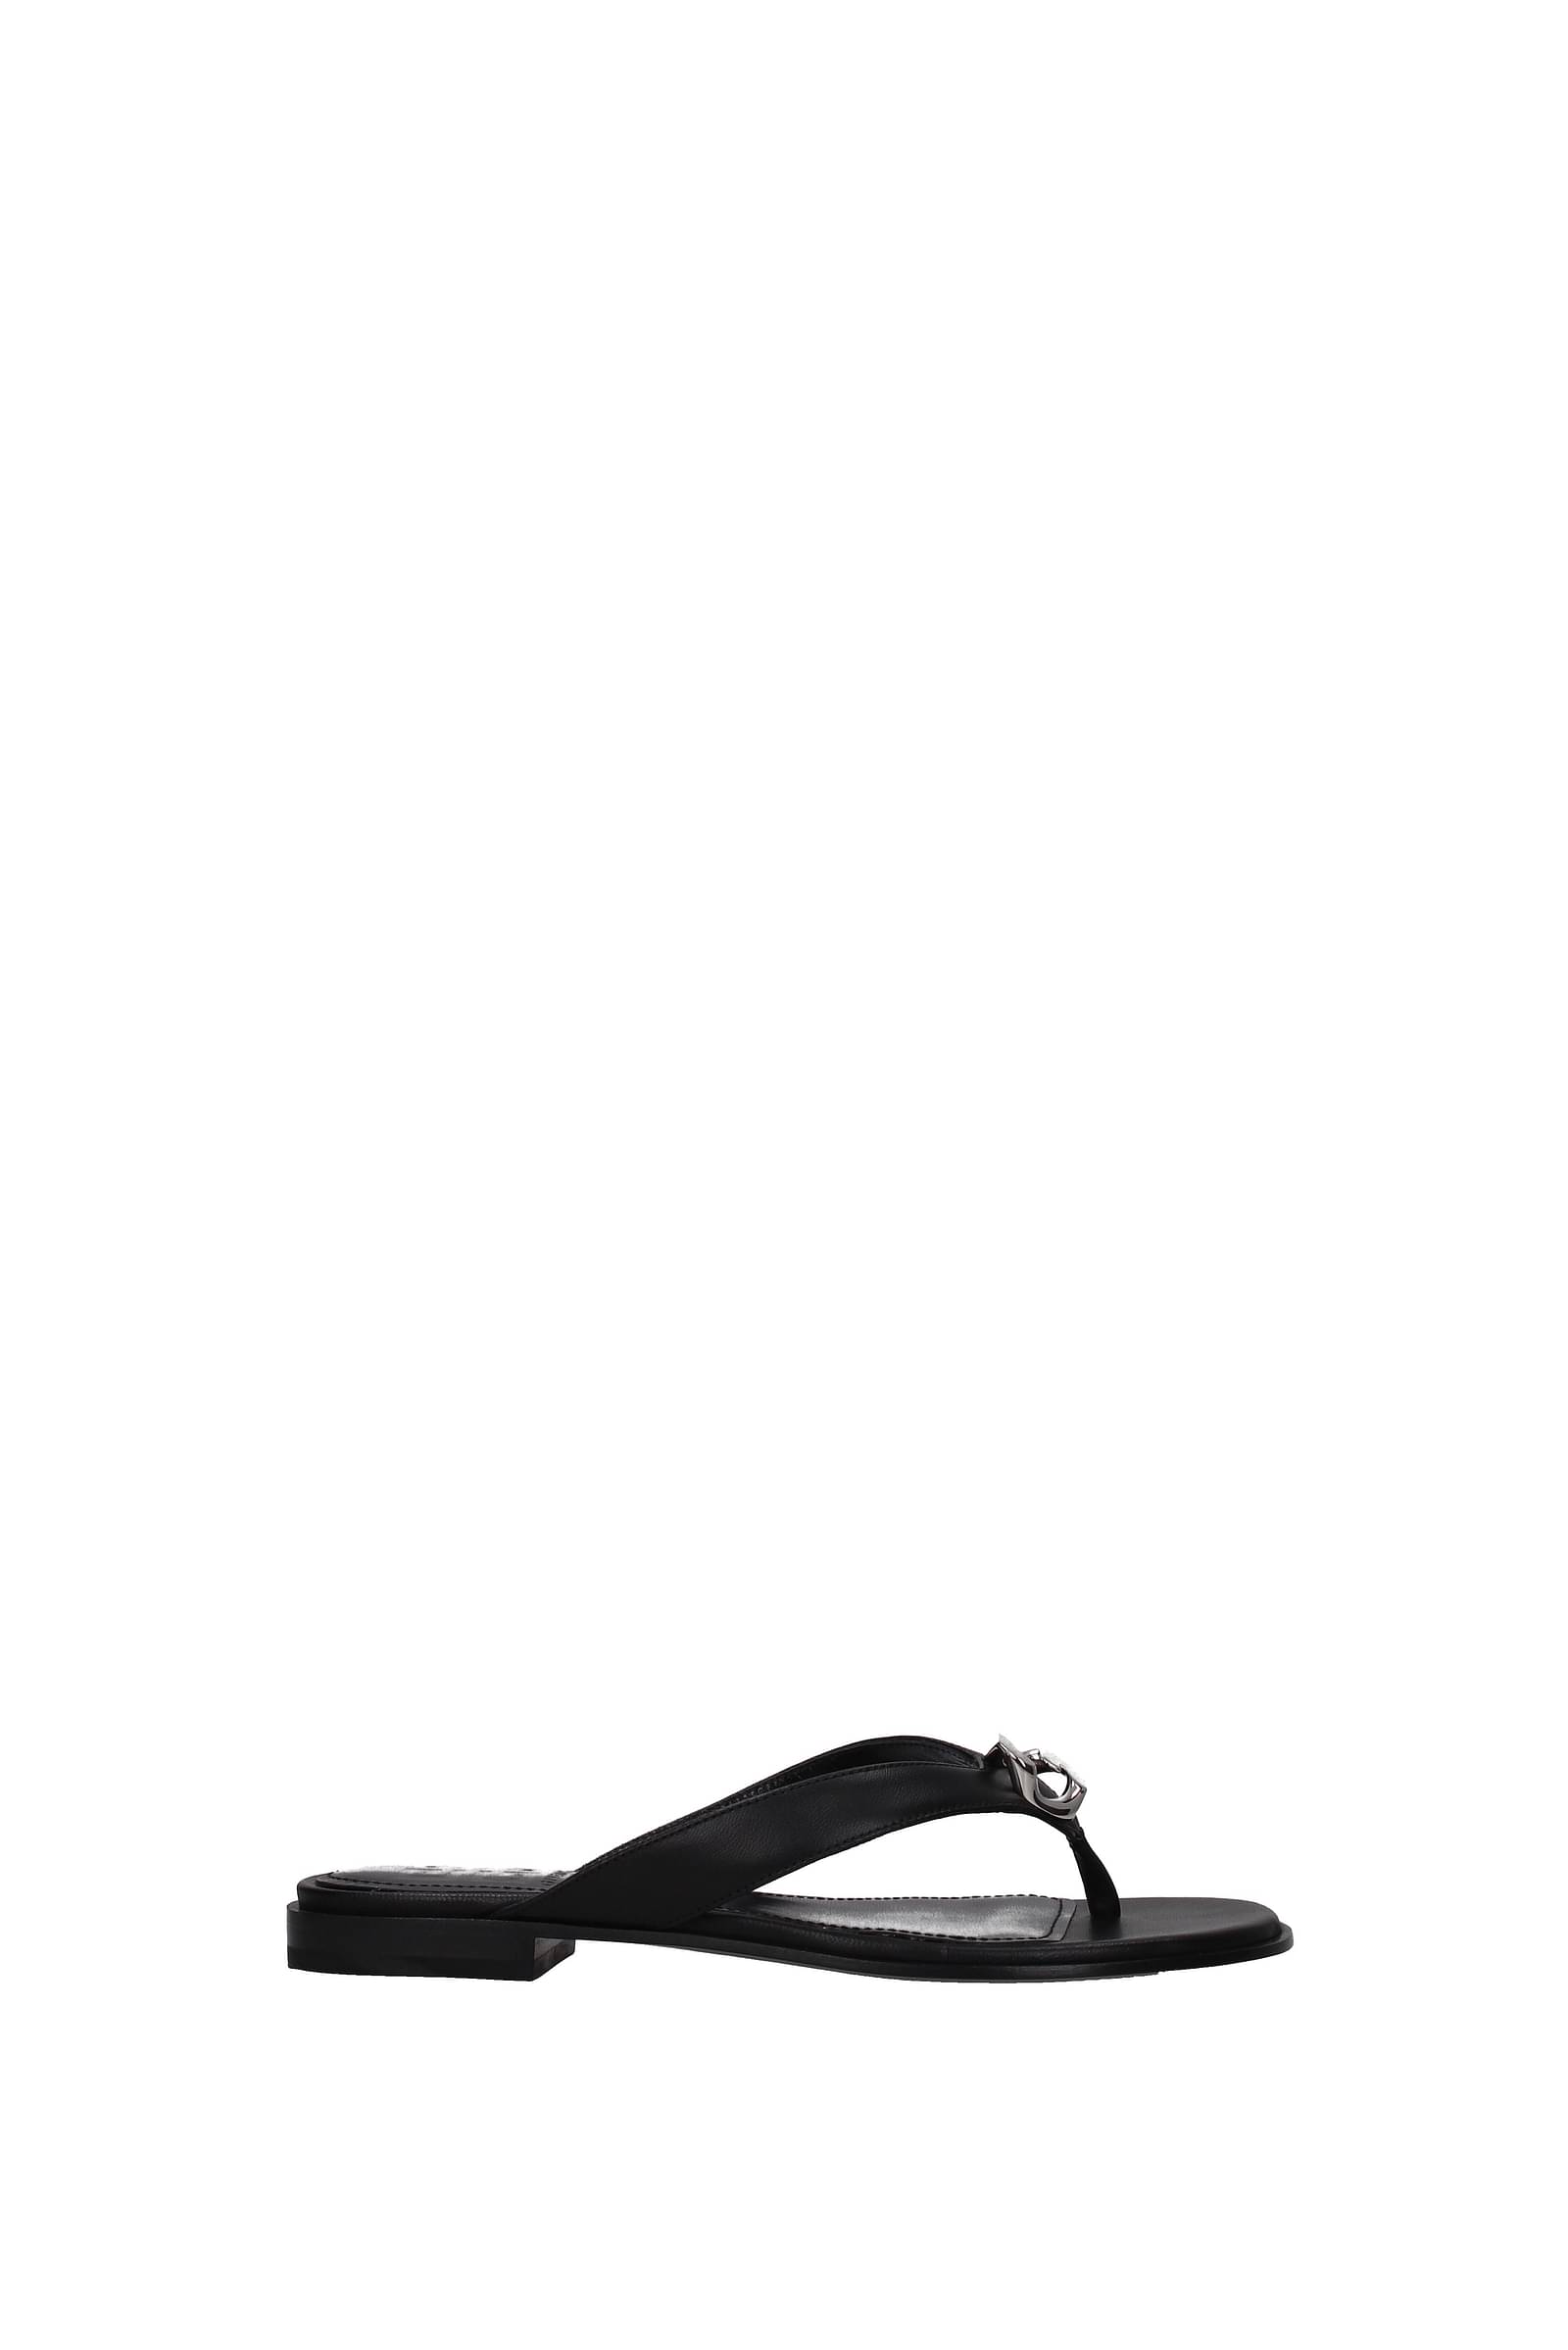 Givenchy Flip flops Women BE305CE0YZ001 Leather 252€